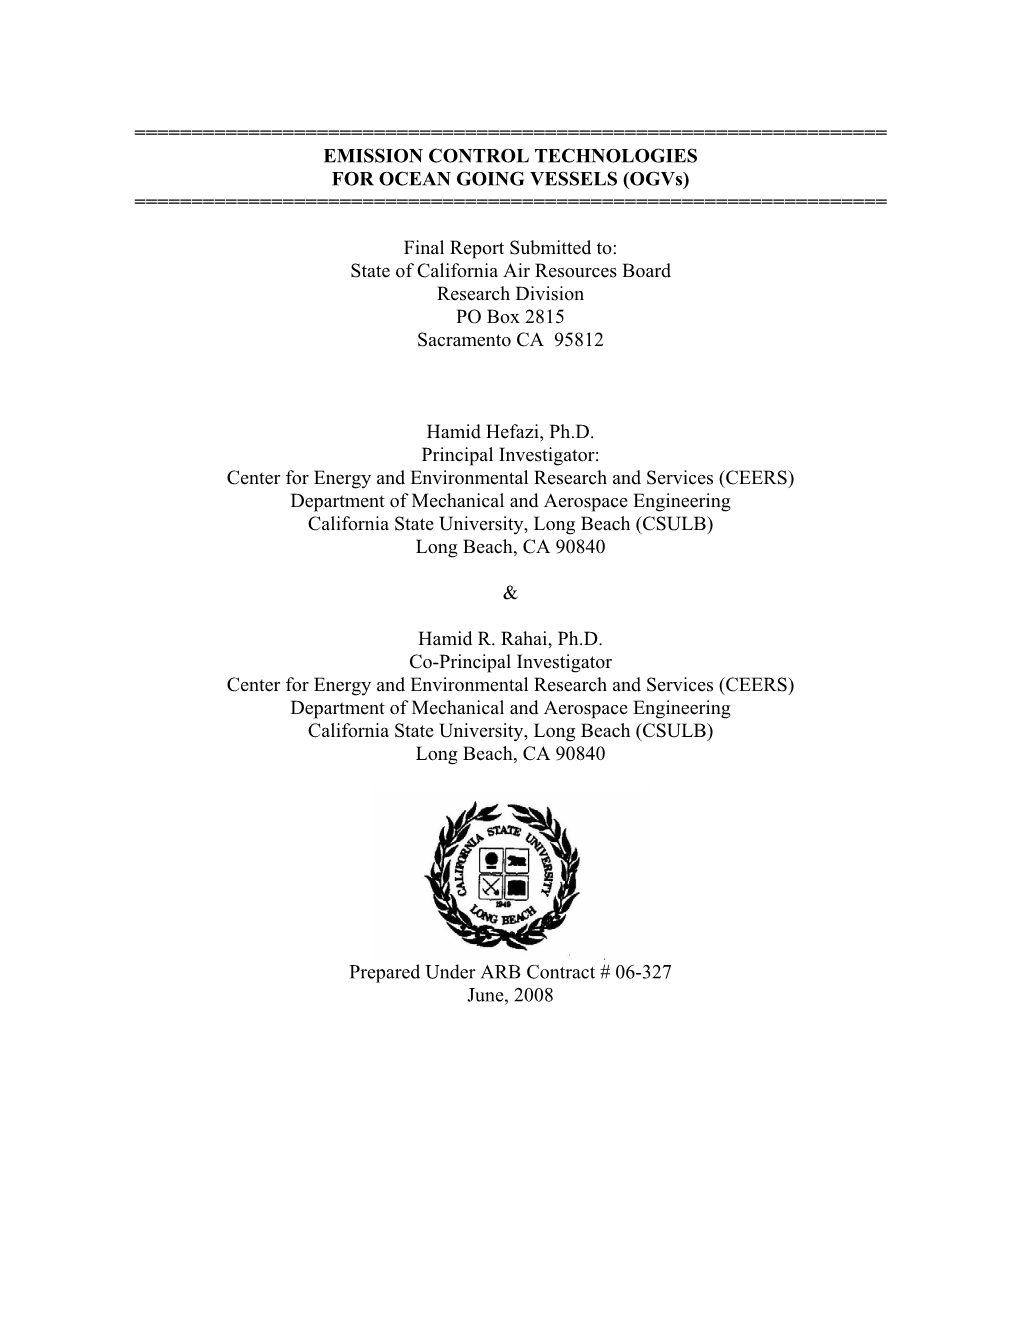 Report: 2008-06-01 Emission Control Technologies for Ocean